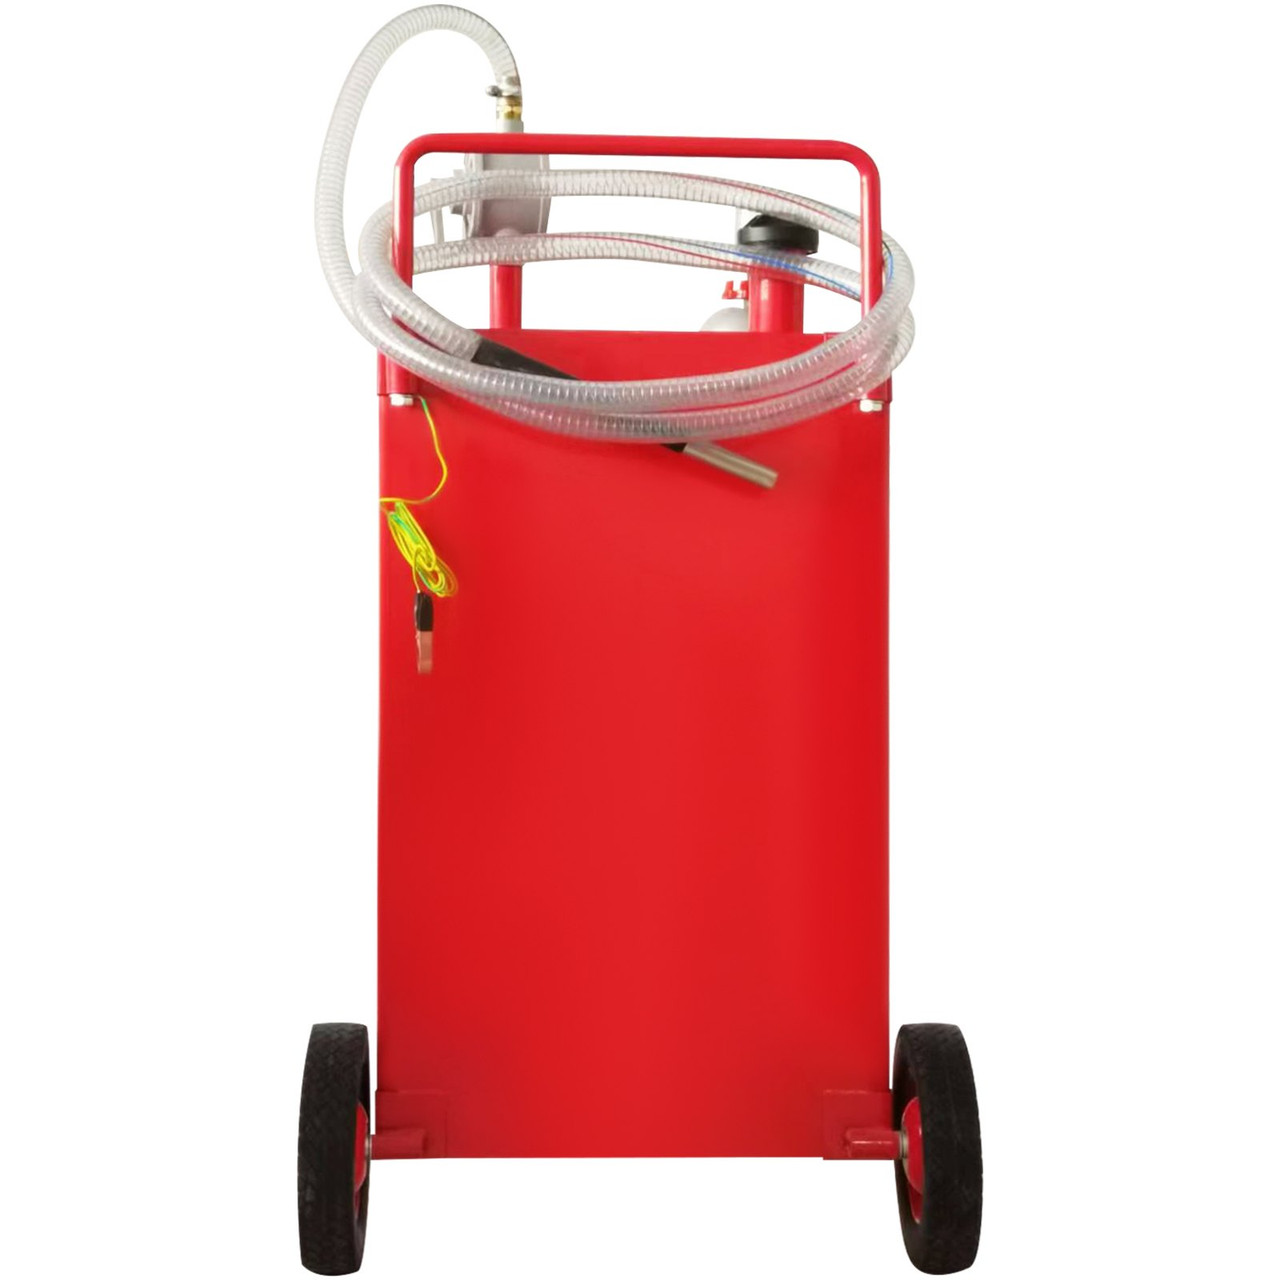 30 Gallon Fuel Caddy, Fuel Storage Tank on 2 Wheels, Portable Gas Caddy with Manuel Transfer Pump, Gasoline Diesel Fuel Container for Cars, Lawn